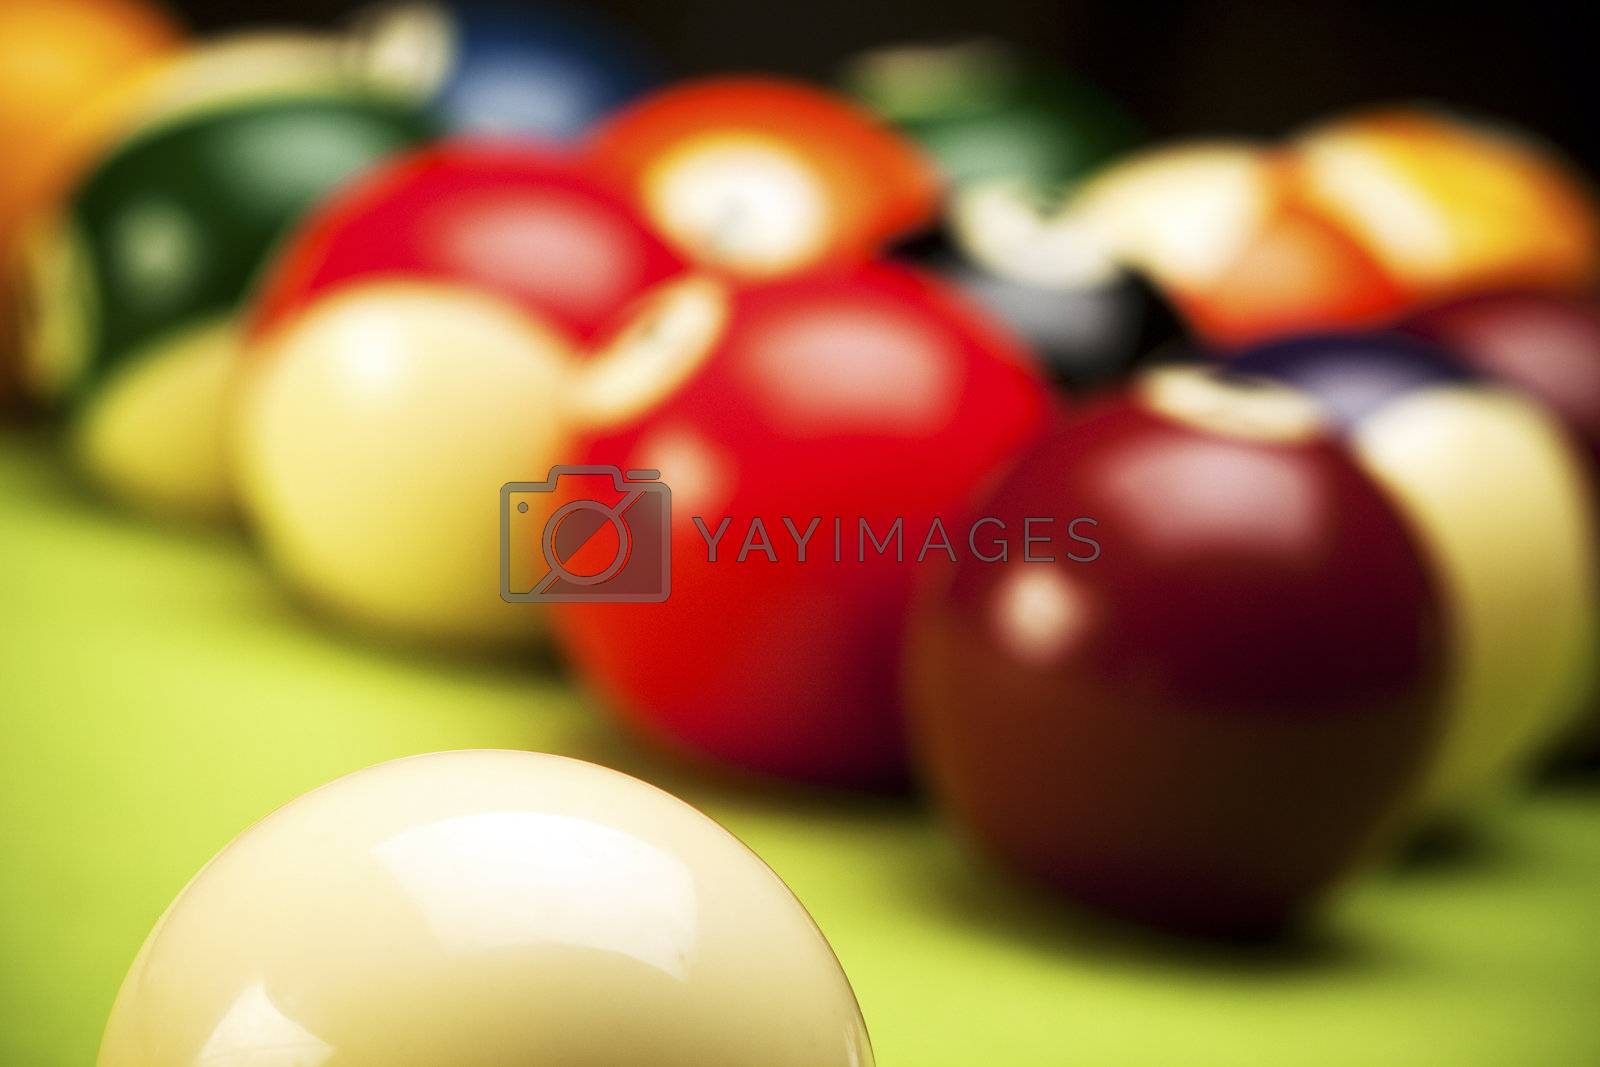 Royalty free image of Pool game on green table by fikmik